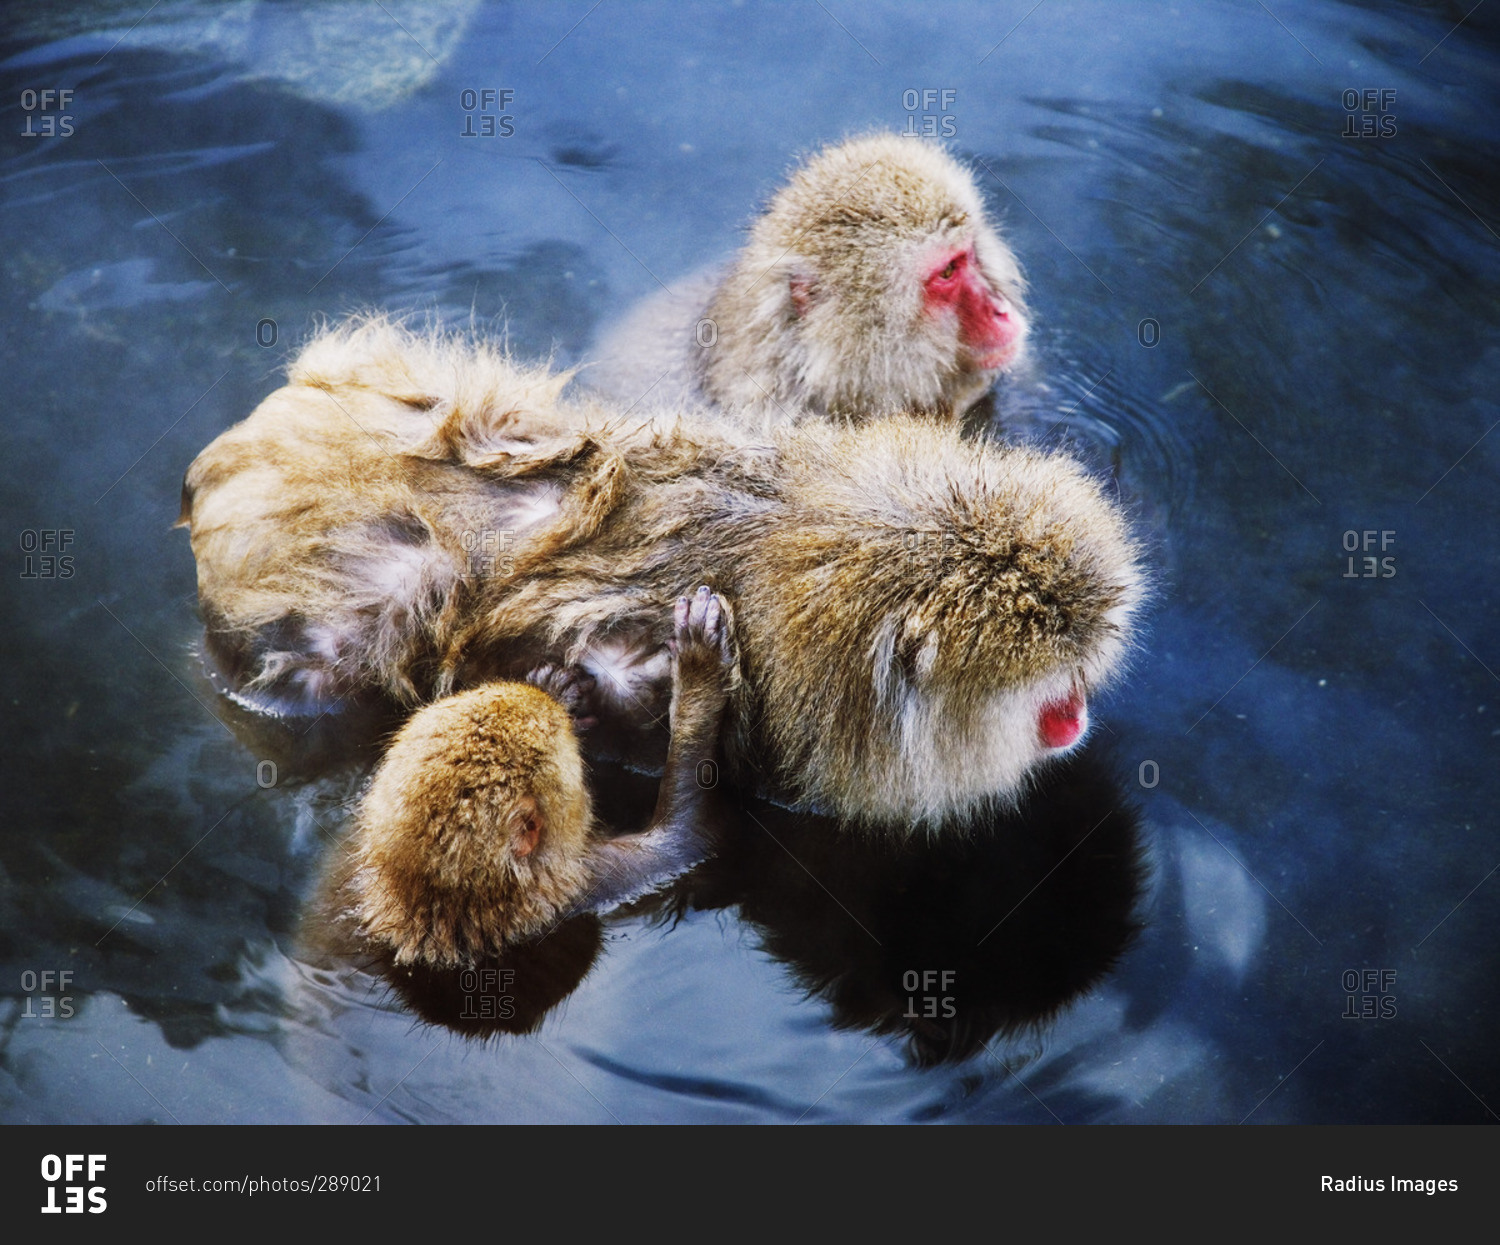 Japanese Macaques in Hot Springs